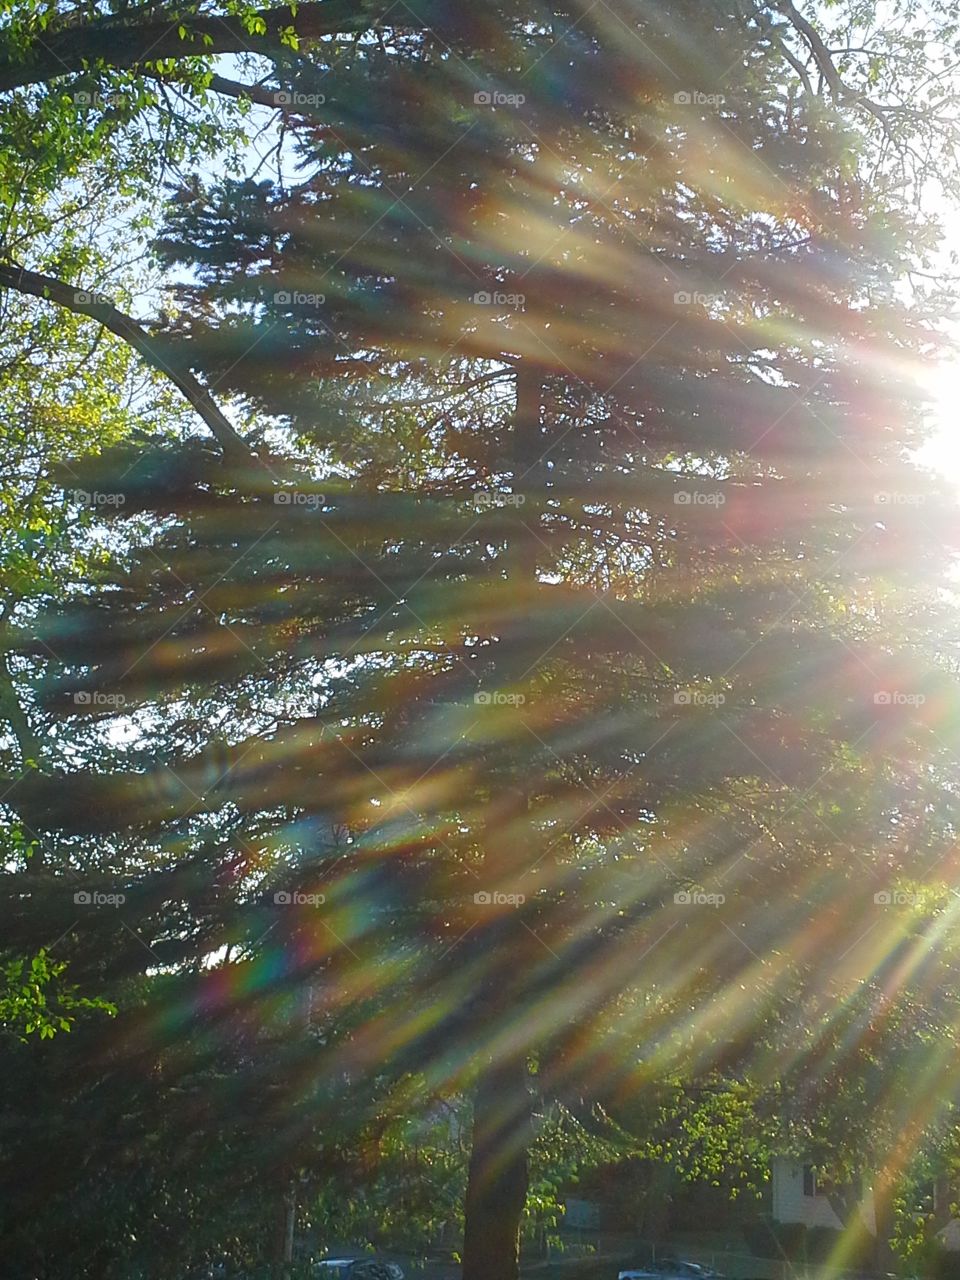 sunshine ,tree,leaves,pine tree, rainbow effect. sitting outside snapping random pictures